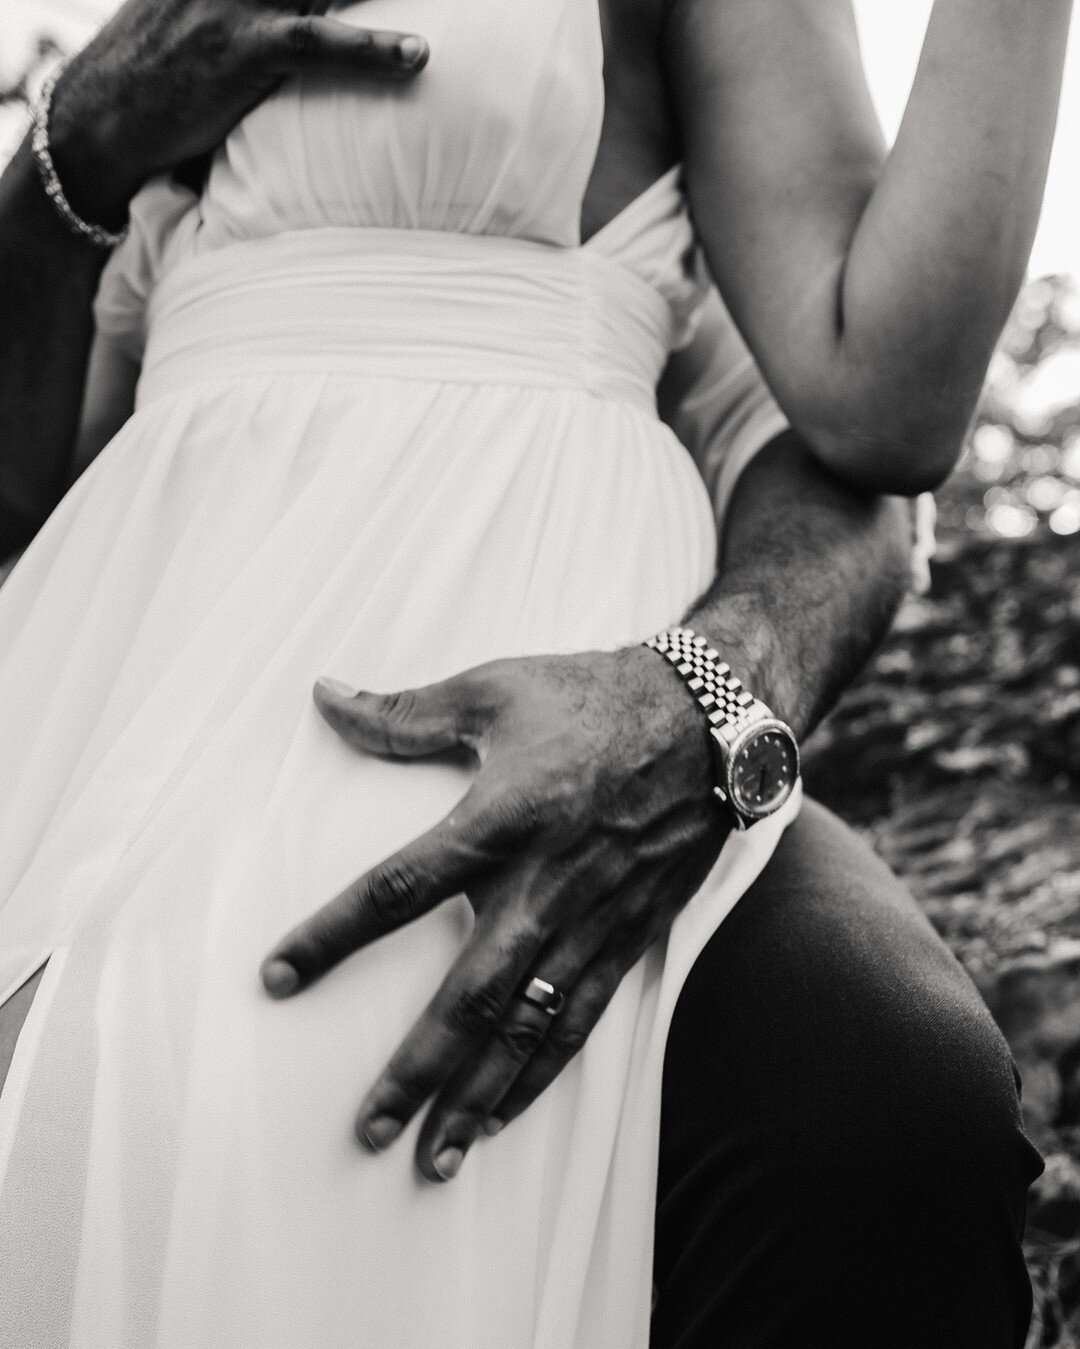 Intimate moments + love celebrations make for some amazing #blackandwhite images. Jade &amp; Sir Gregory were the perfect models for this sunset couples session.
.
#love #summer #blackandwhite #sunset #lovestory #intimatewedding #elopement #couples #